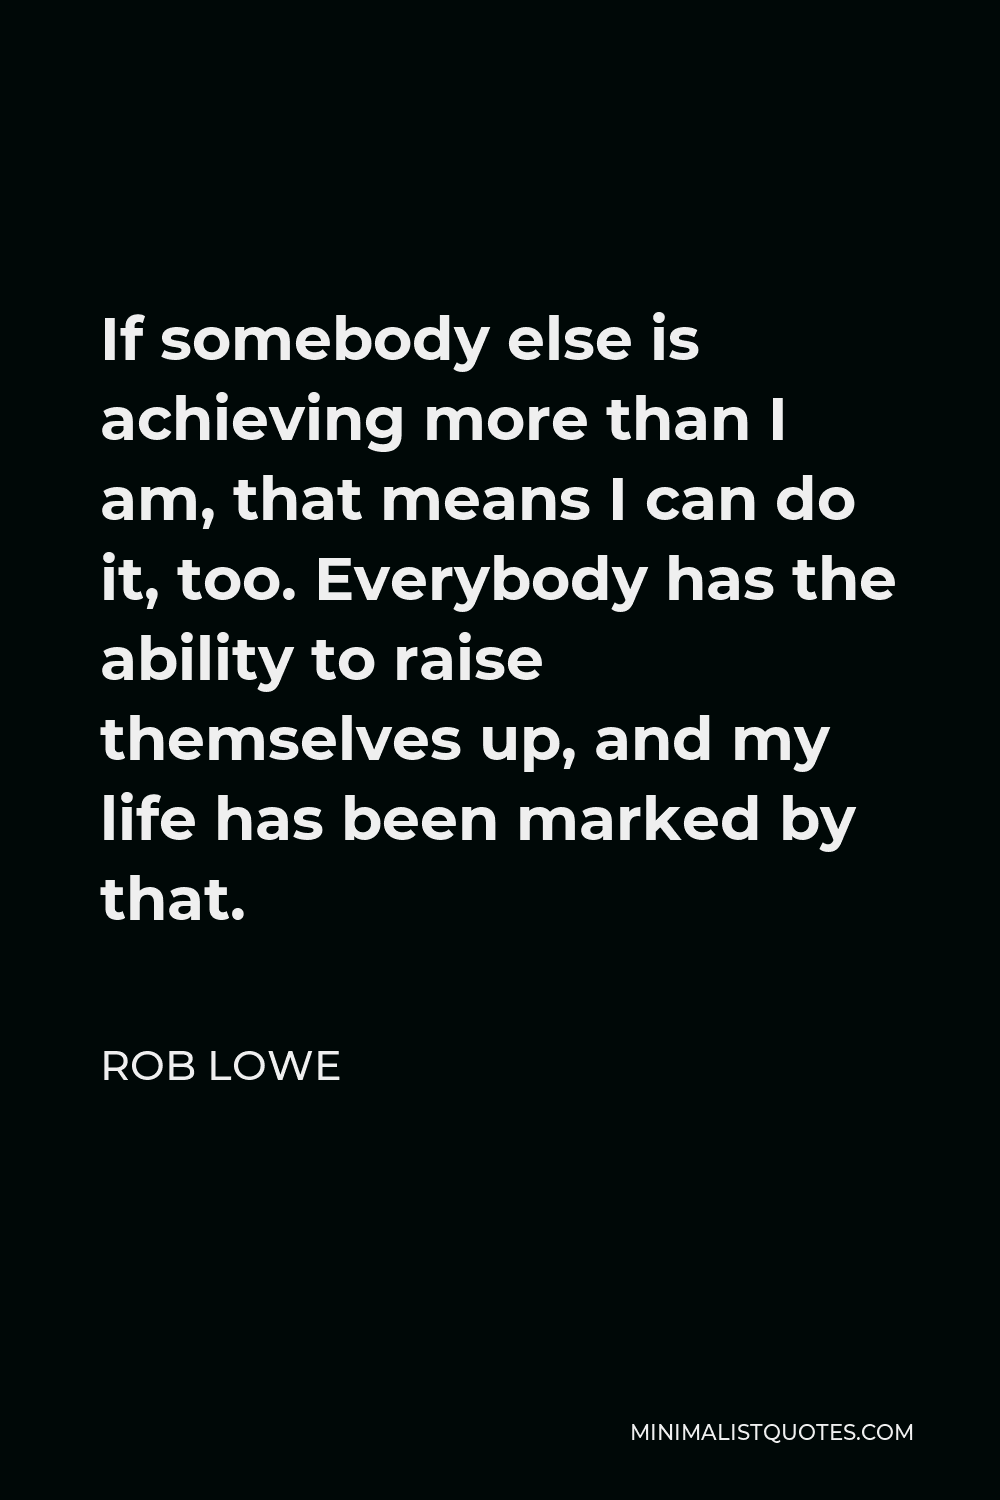 Rob Lowe Quote - If somebody else is achieving more than I am, that means I can do it, too. Everybody has the ability to raise themselves up, and my life has been marked by that.